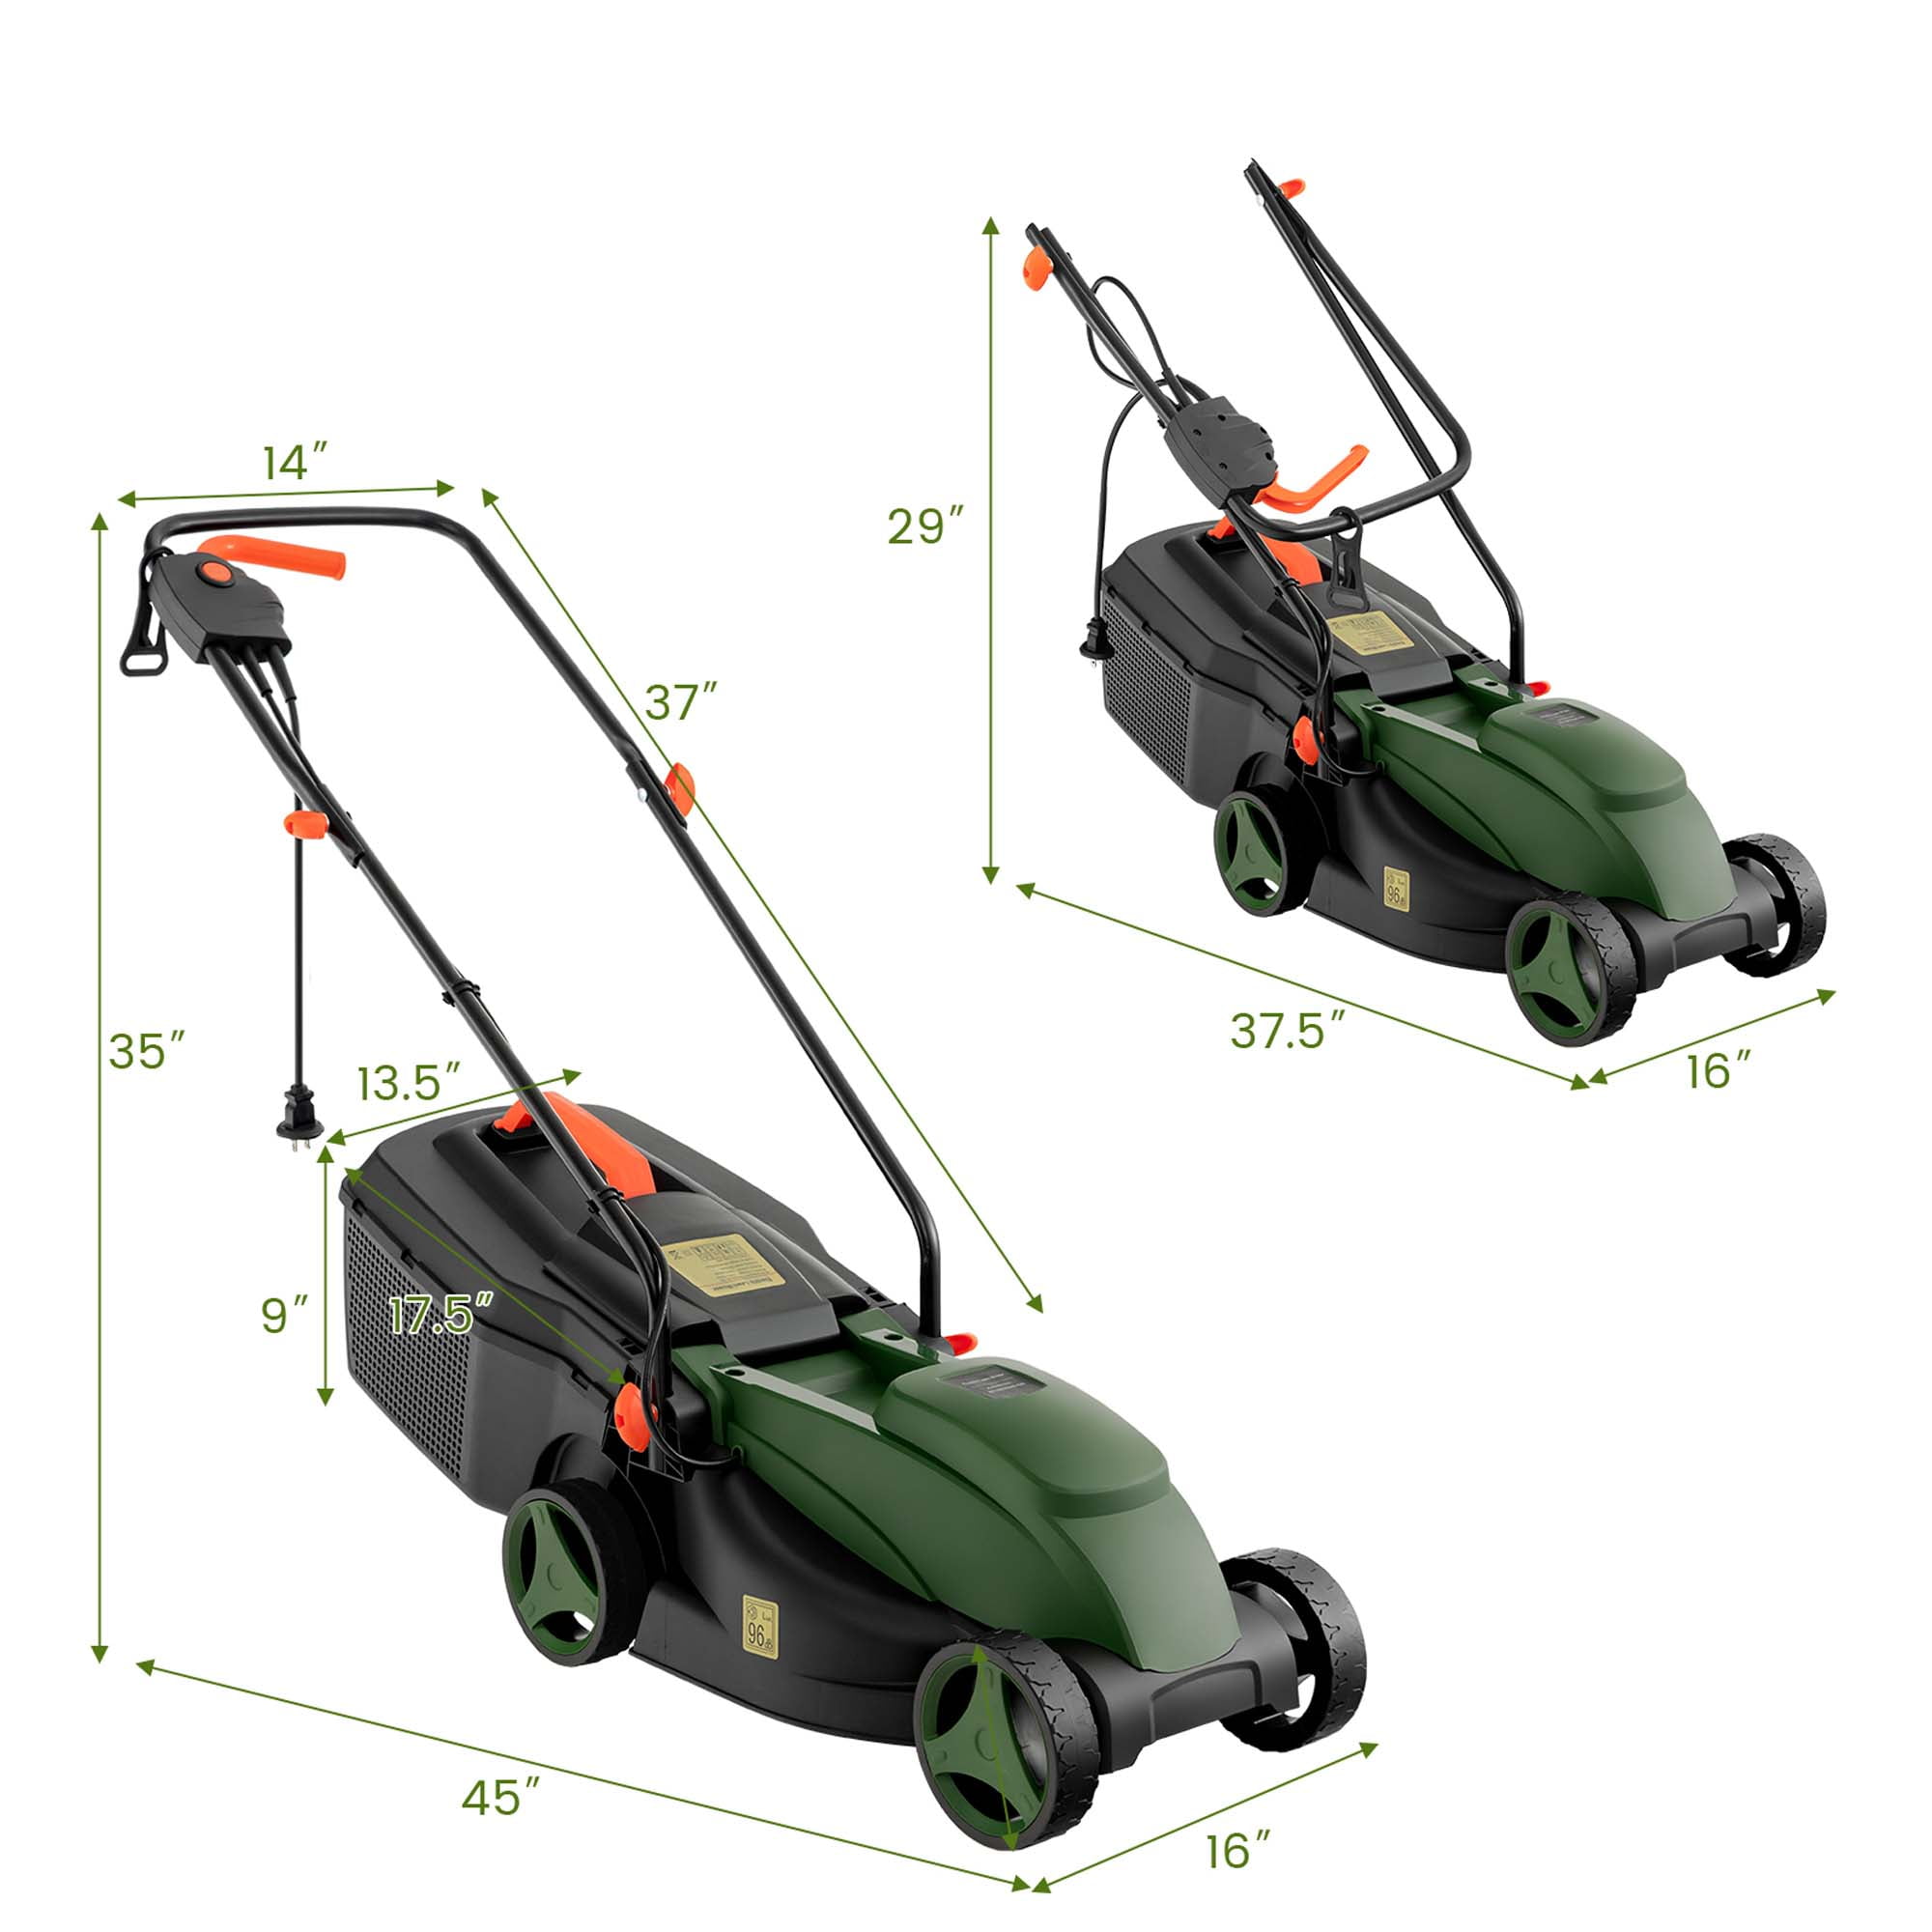 Costway 12 Amp 14-inch Electric Push Lawn Corded Mower With Grass Bag Green  : Target